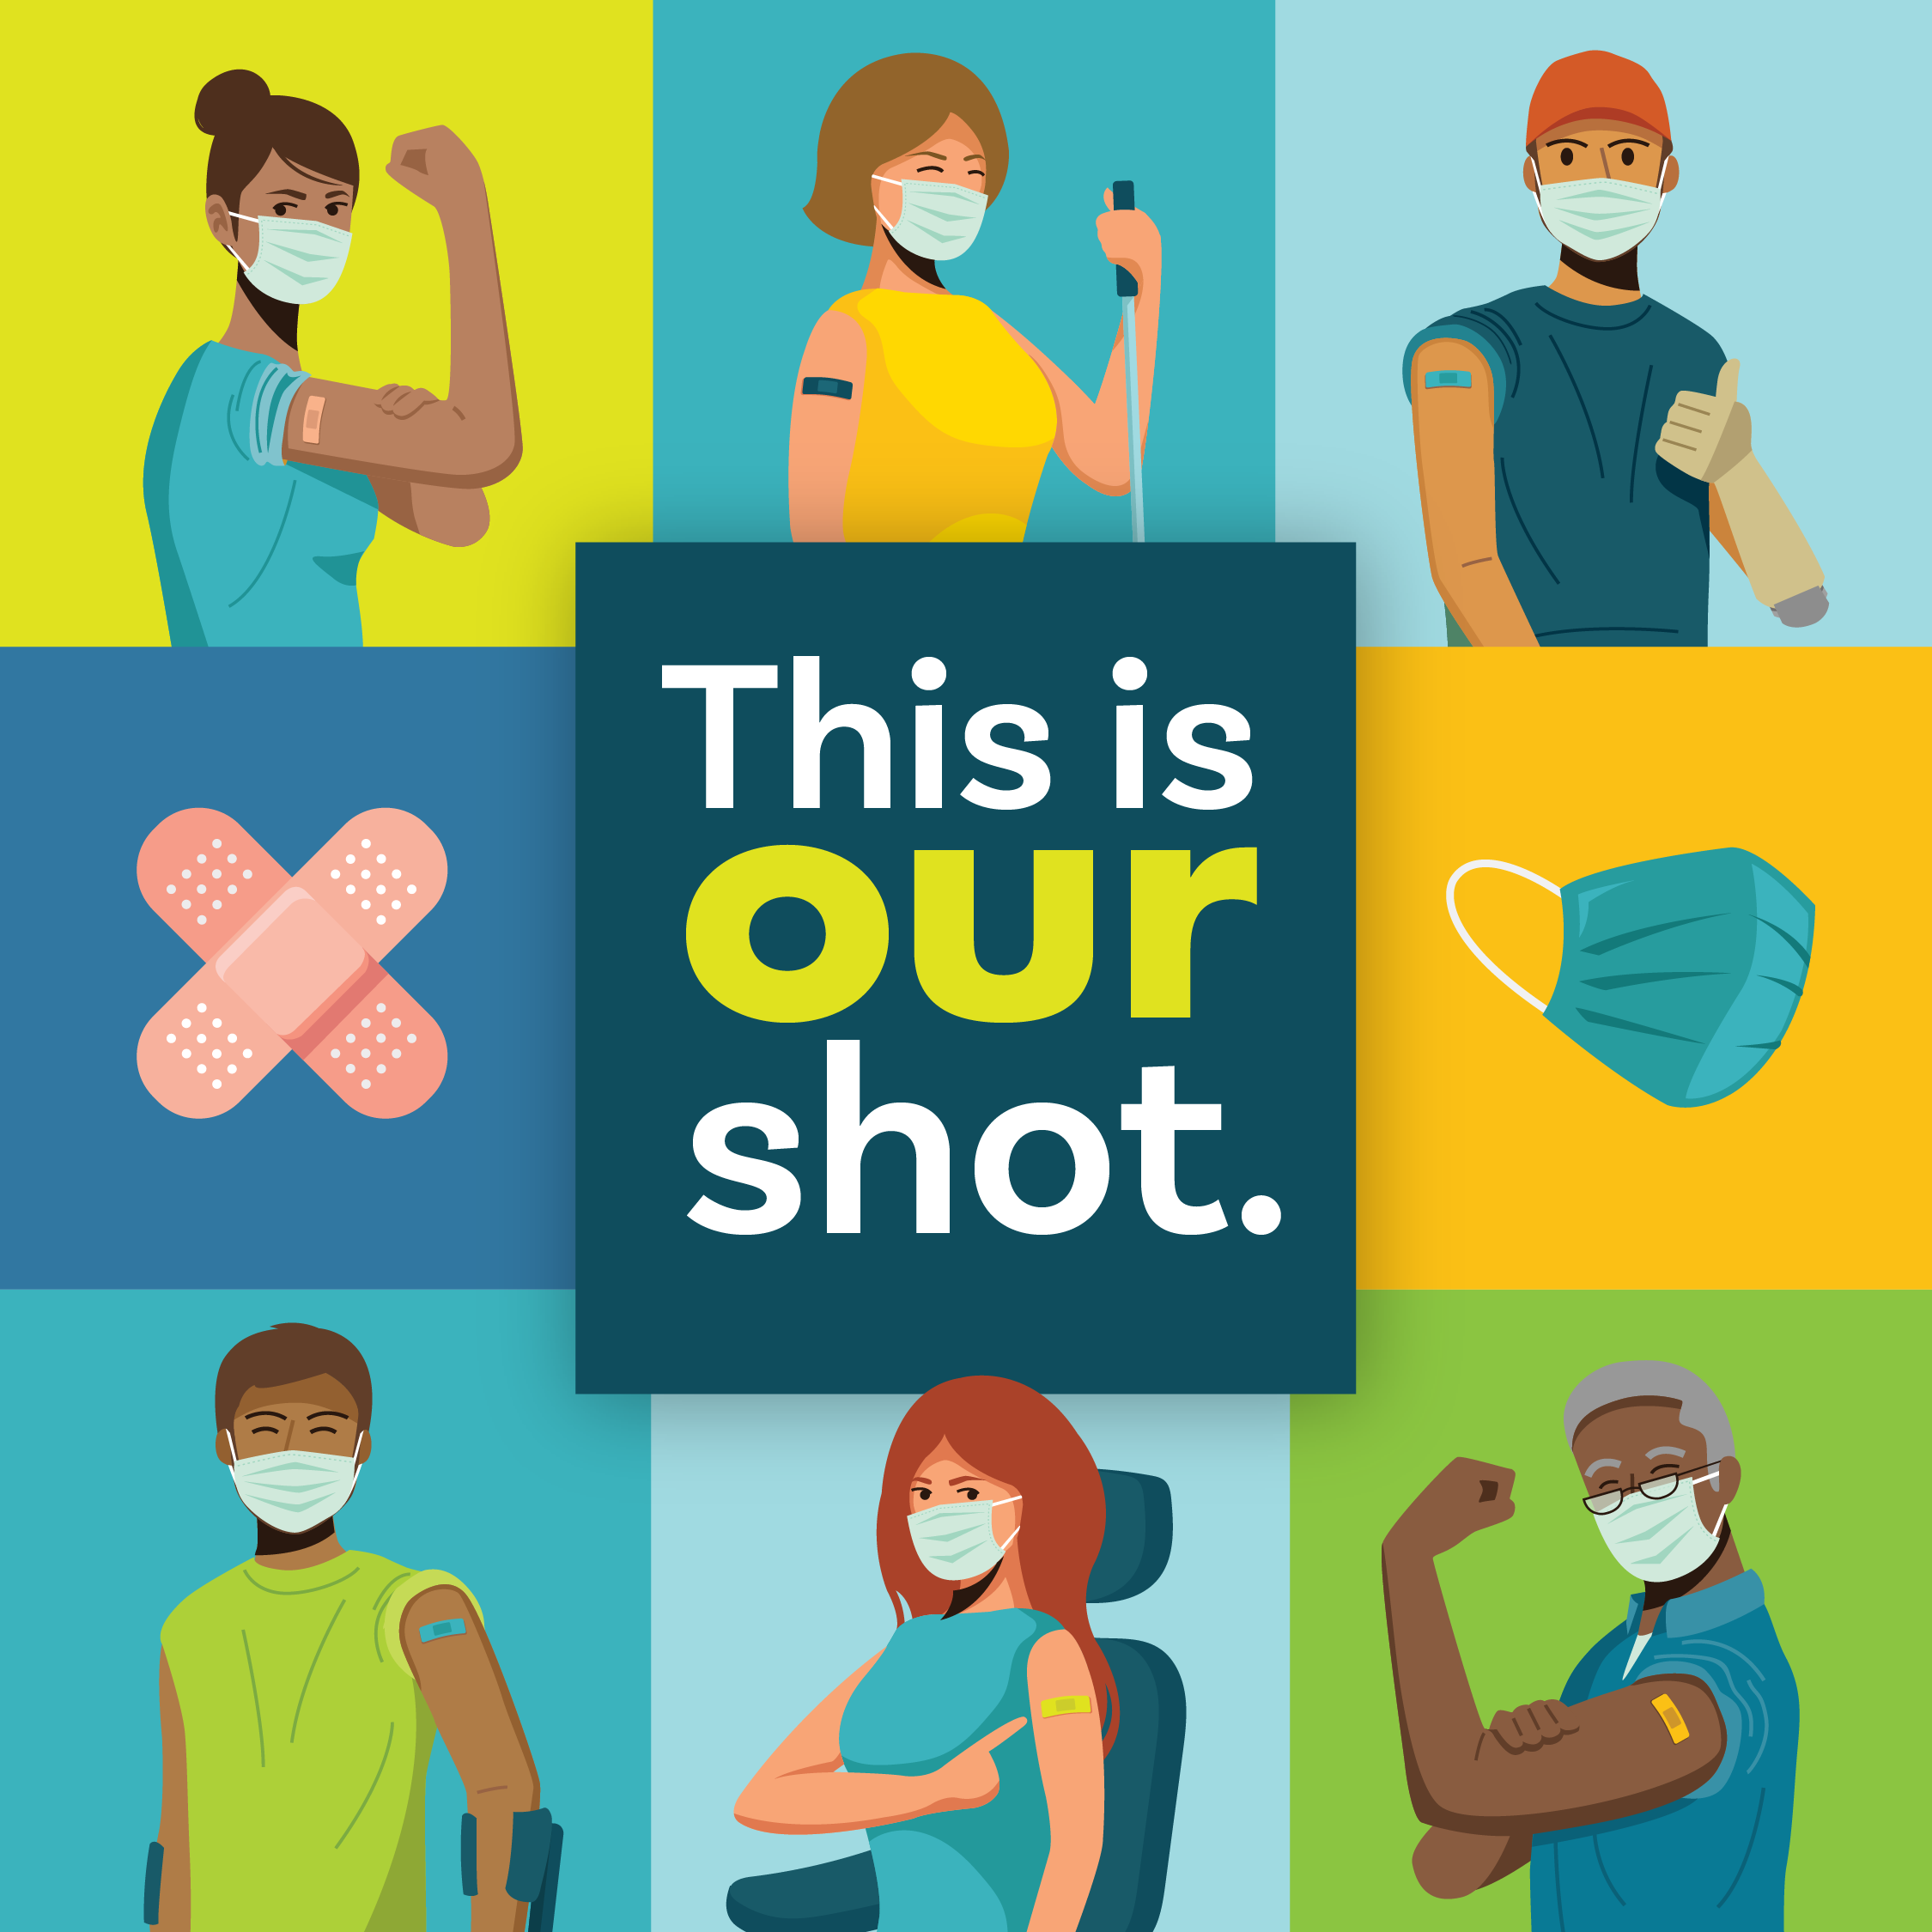 Graphic illustration of eight boxes with one box in the center that has the campaign message. It reads This is Our Shot. All letters are white except our, which is bright green over a dark blue background. Remaining illustrations include a young Latina woman in a mask holding up her arm with a bandaid on it in front of a light green background, woman with a visual disability with a mask on and bandaid on her arm in front of a teal background, young man with a mask and bandaid on his arm and a prosthetic arm holding a thumbs up in front of a light blue background, two bandaids in an x shape on a dark blue background, blue face mask on a yellow background, young Black man with a mask on and bandaid on his arm with crutches on a teal background, white woman with a mask on and pointing to a bandaid on her arm in a wheelchair on a light blue background, and an older Black man with a mask on and a bandaid on his arm holding up his arm on a light green background.